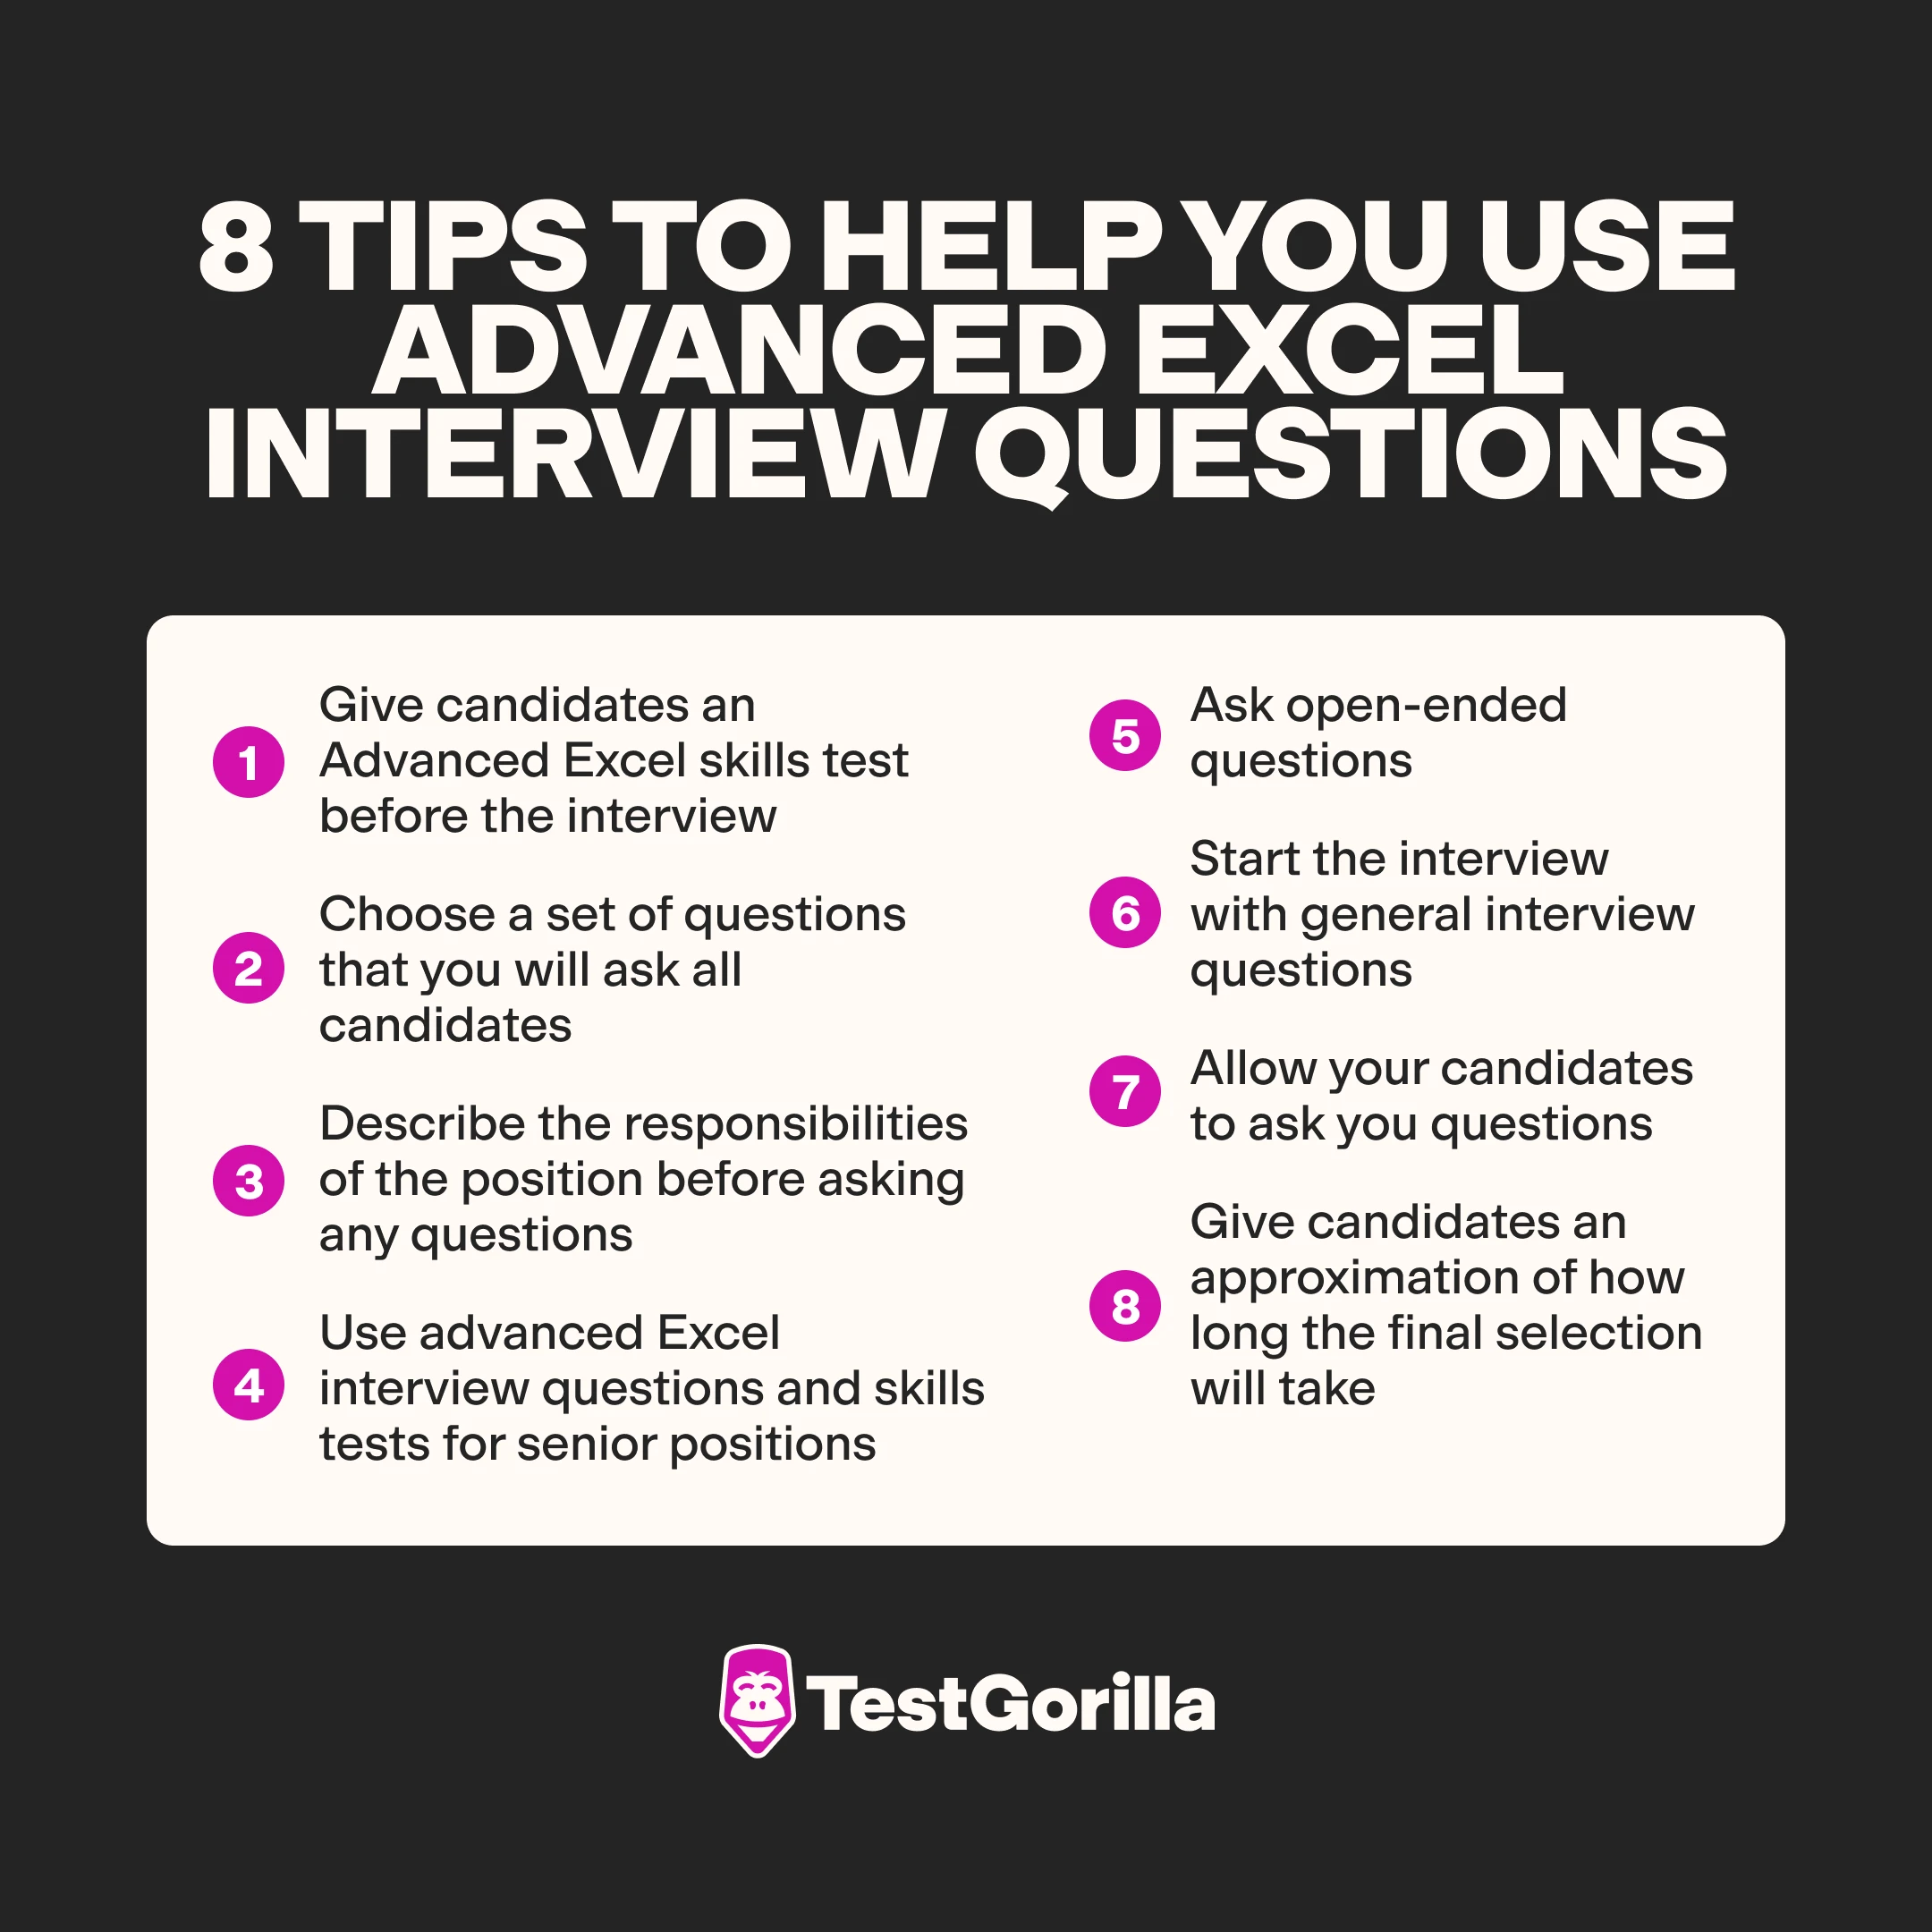 image showing tips to help you use advanced Excel interview questions